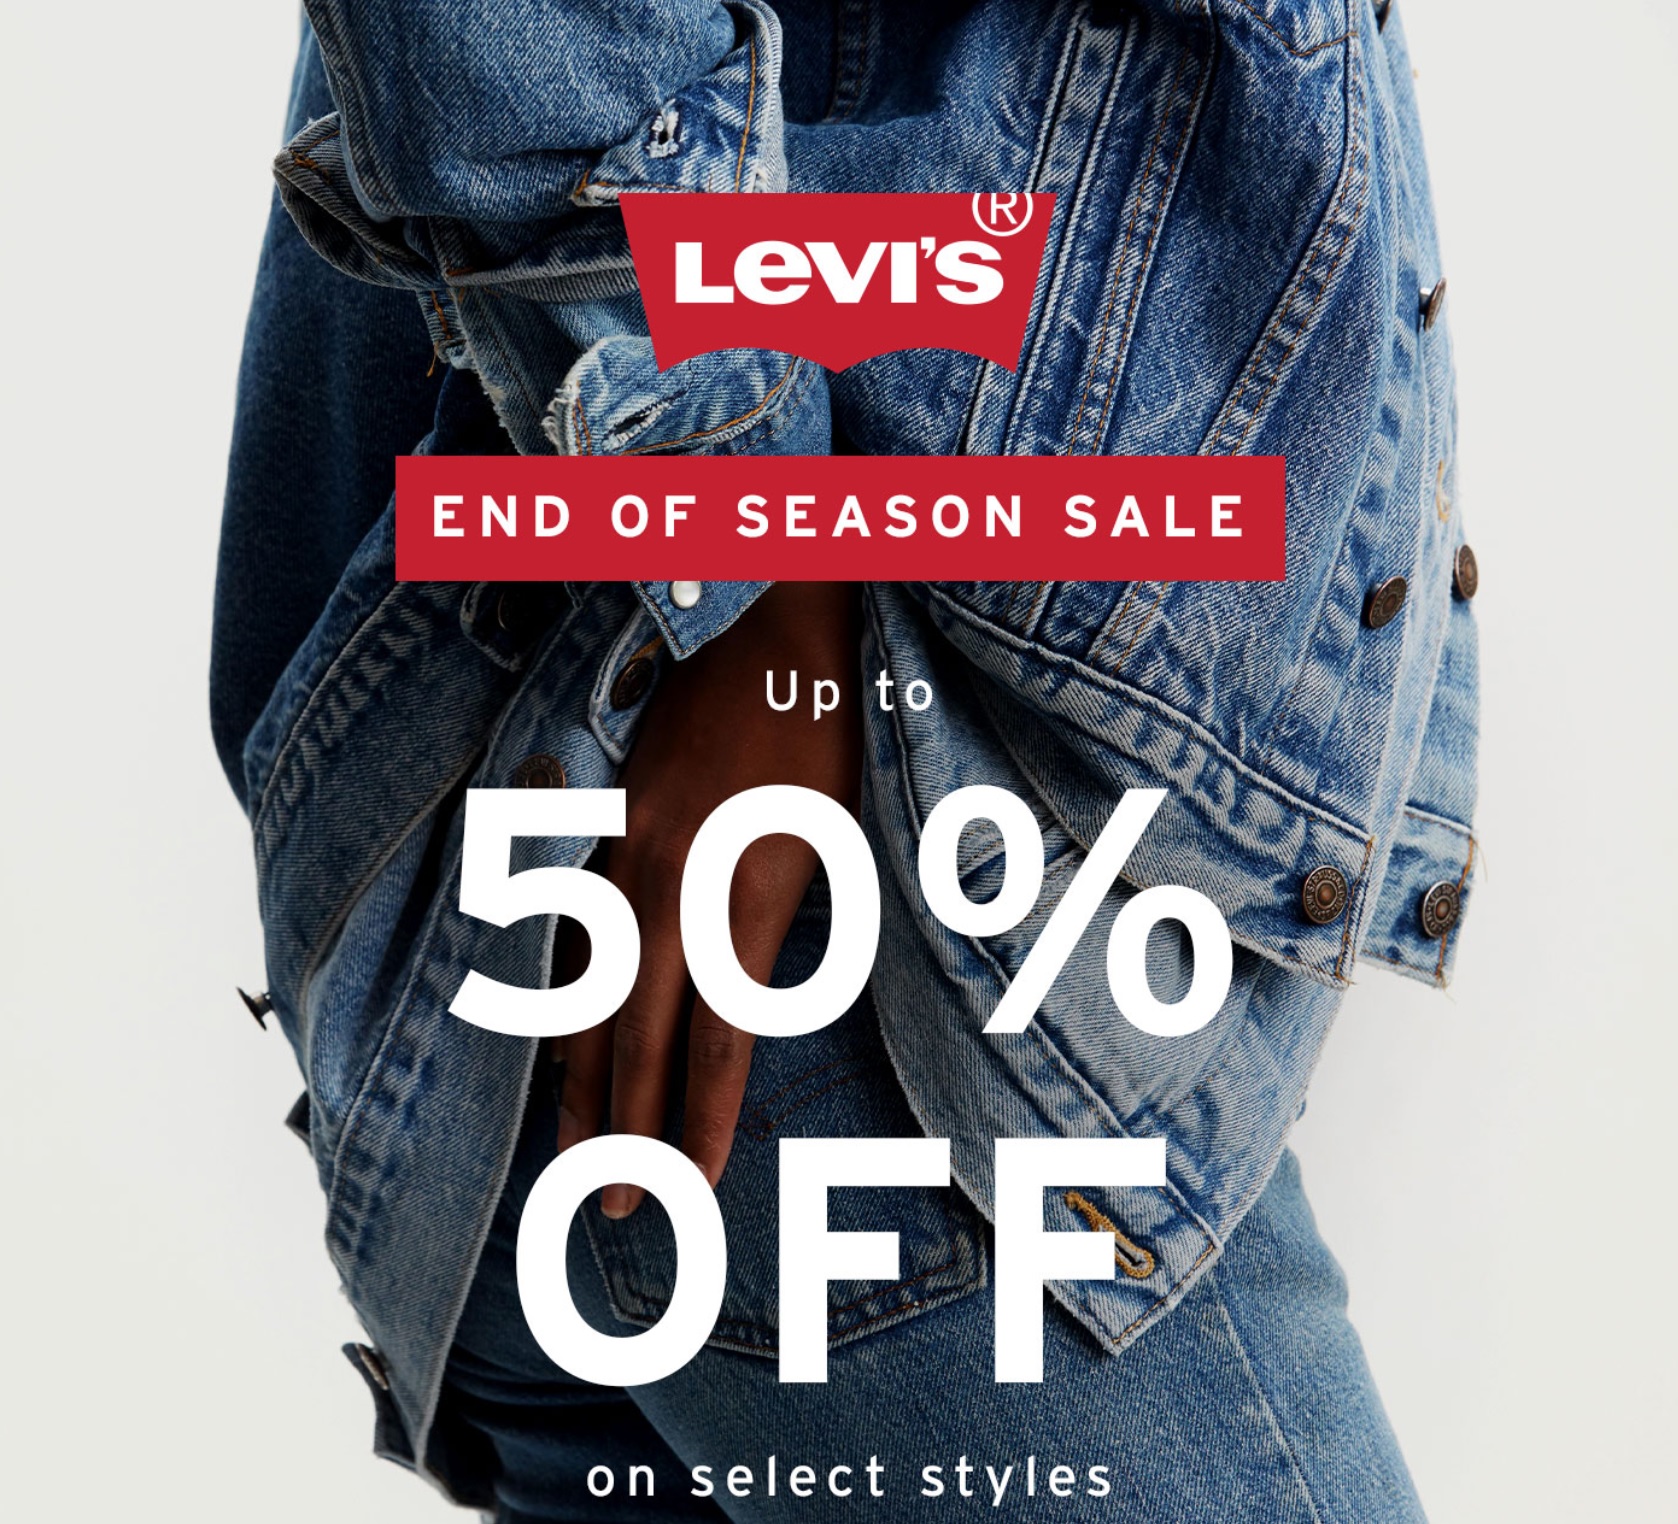 Levi's Canada End of Season Sale: Save Up to 50% OFF Jeans, Jackets,  Hoodies & More + FREE Shipping - Canadian Freebies, Coupons, Deals,  Bargains, Flyers, Contests Canada Canadian Freebies, Coupons, Deals,